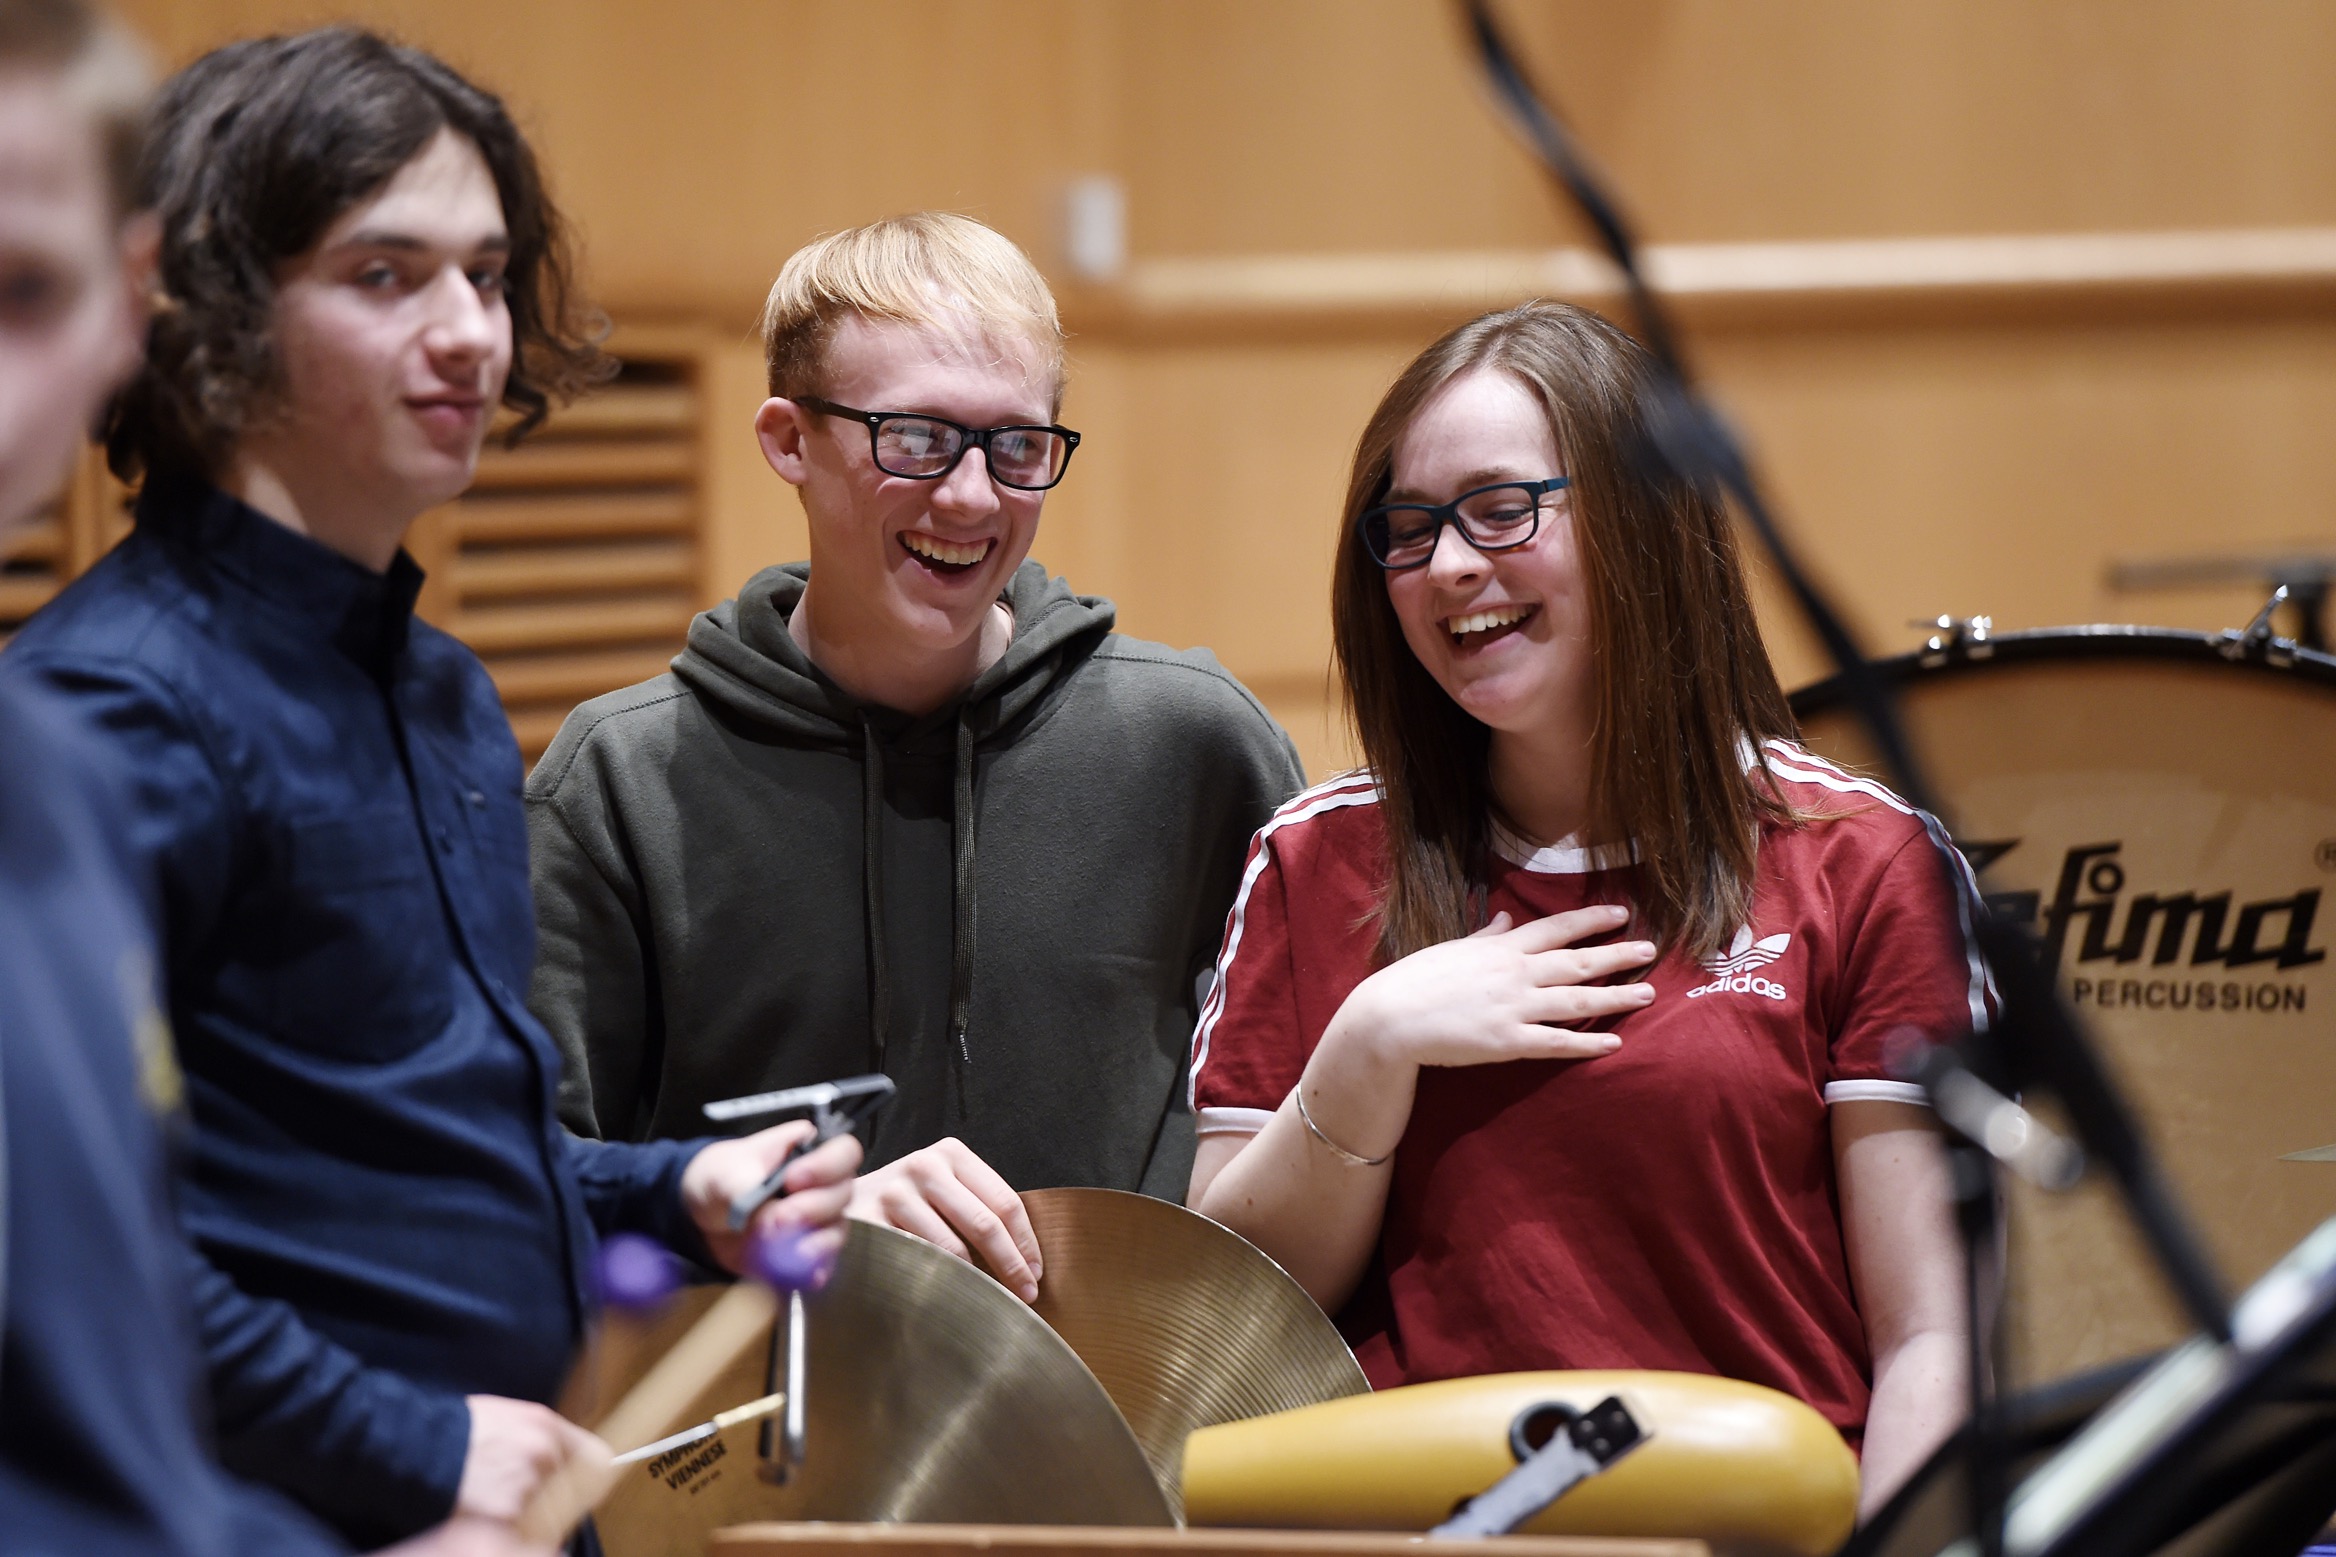 Zach Mitchell, Murray Sedgwick & Caitlin Monaghan, Percussion